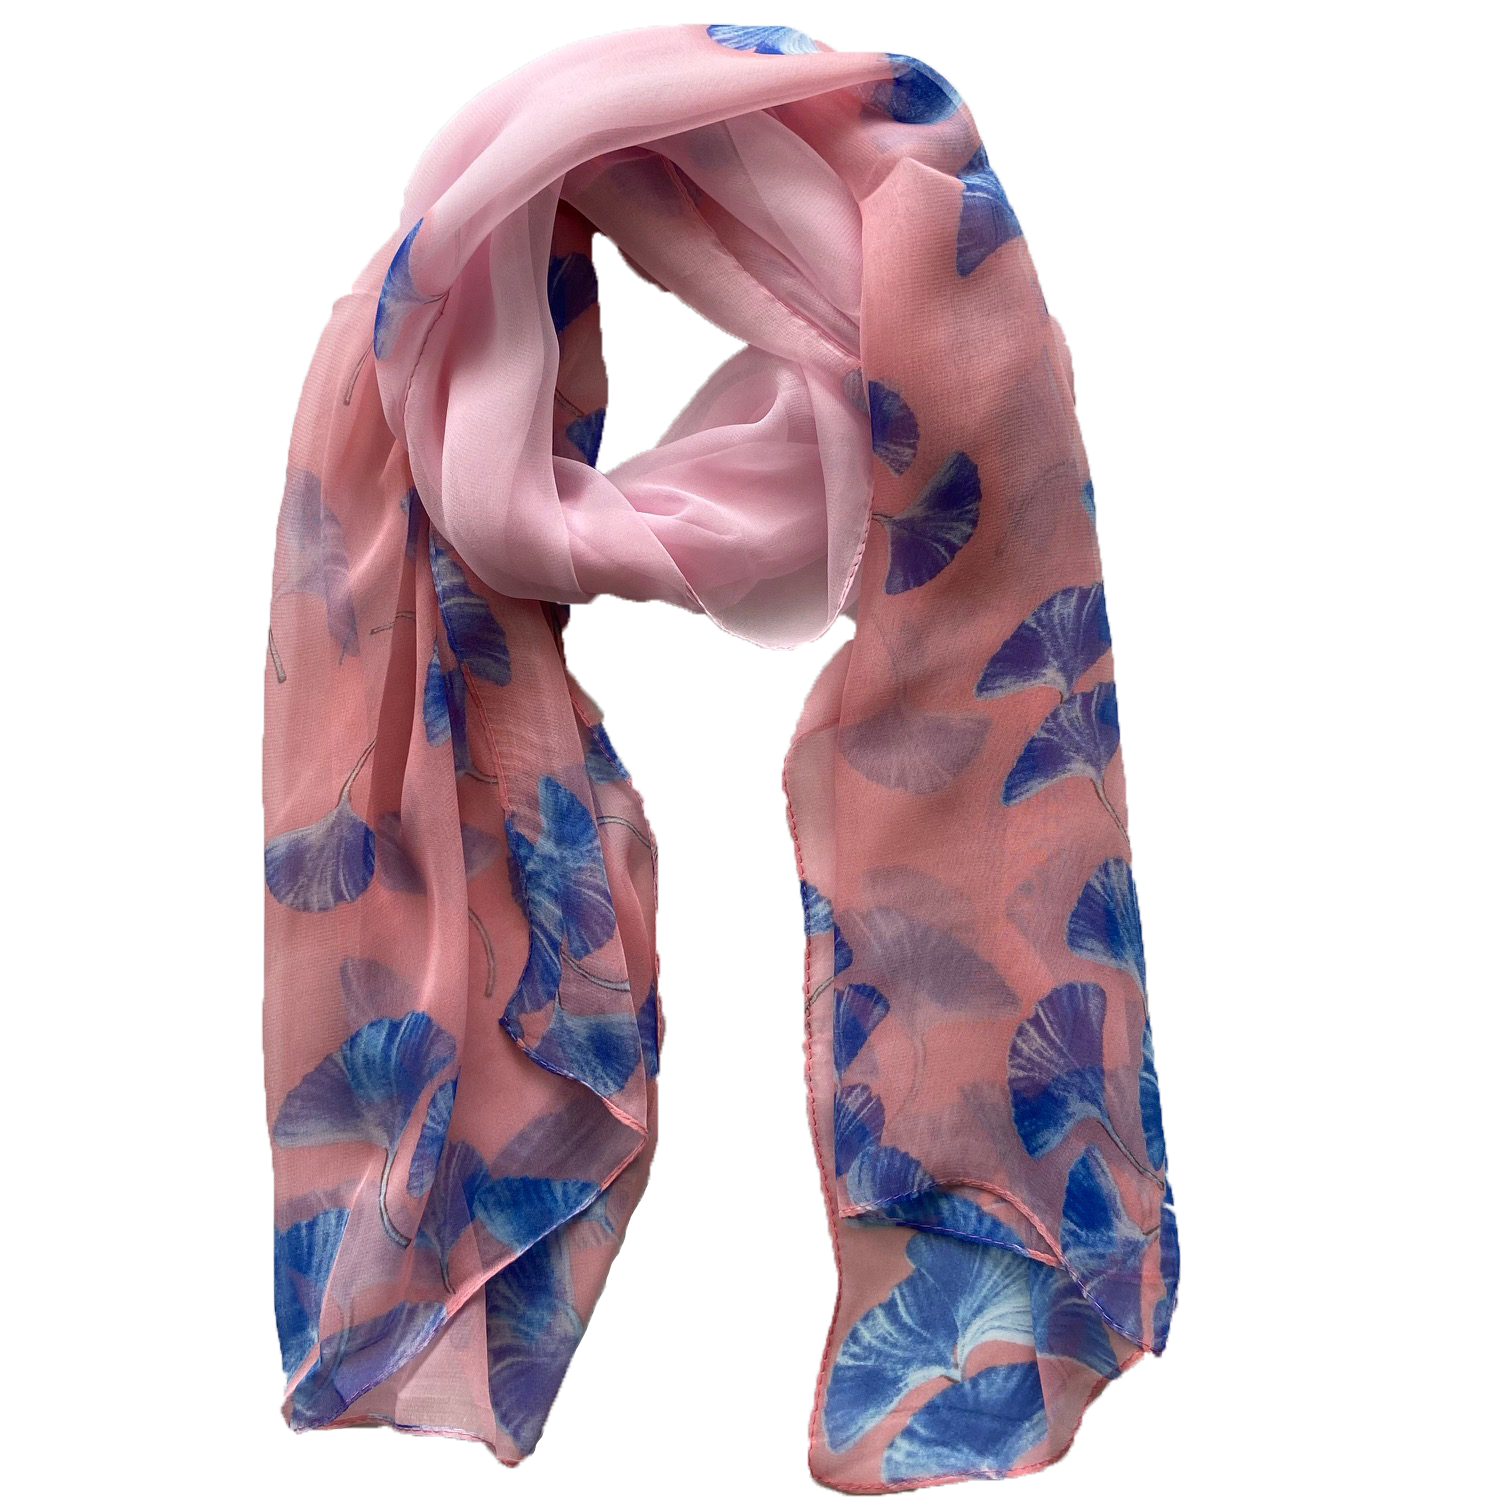 Matching Head Scarf - pink blue flans